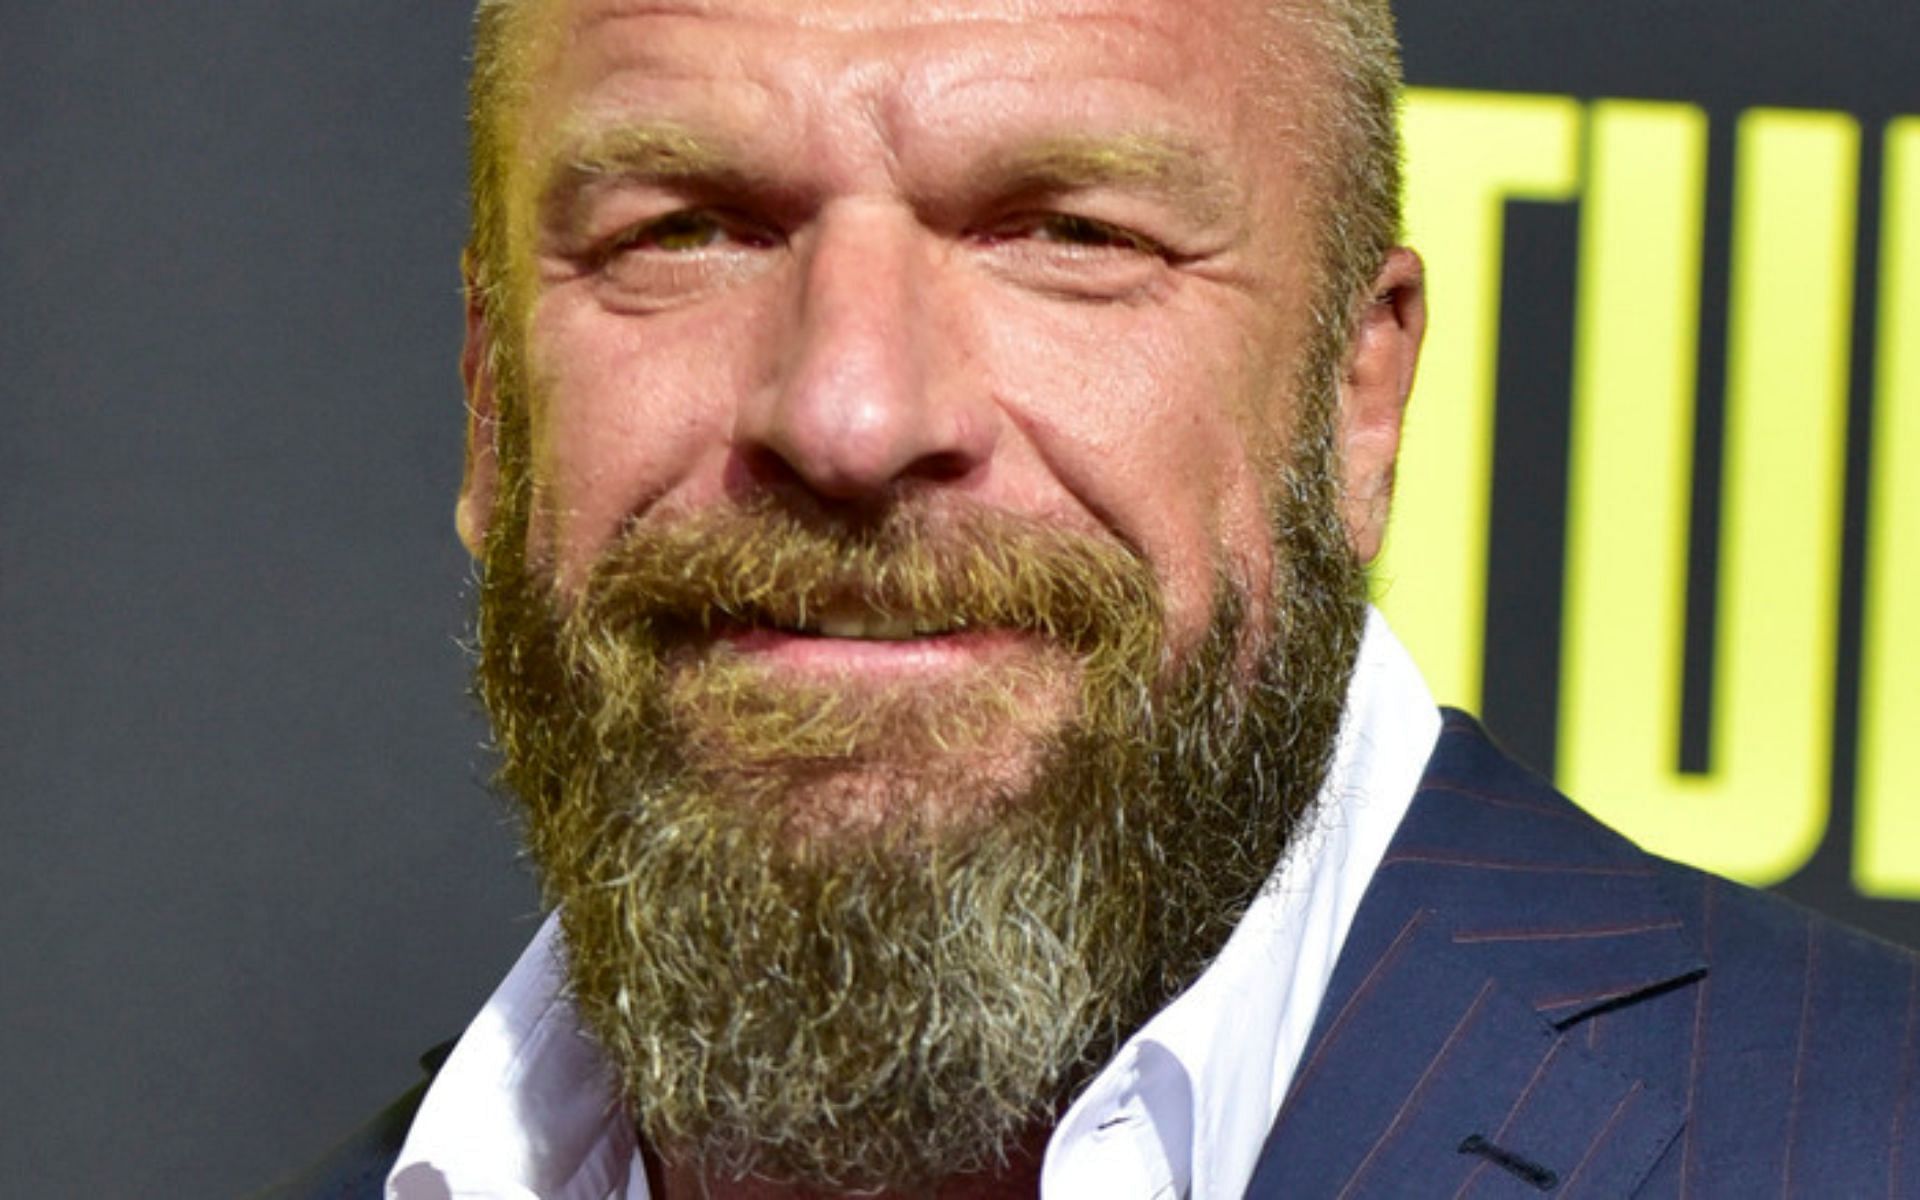 Triple H has been on a streak of bringing back released WWE talents